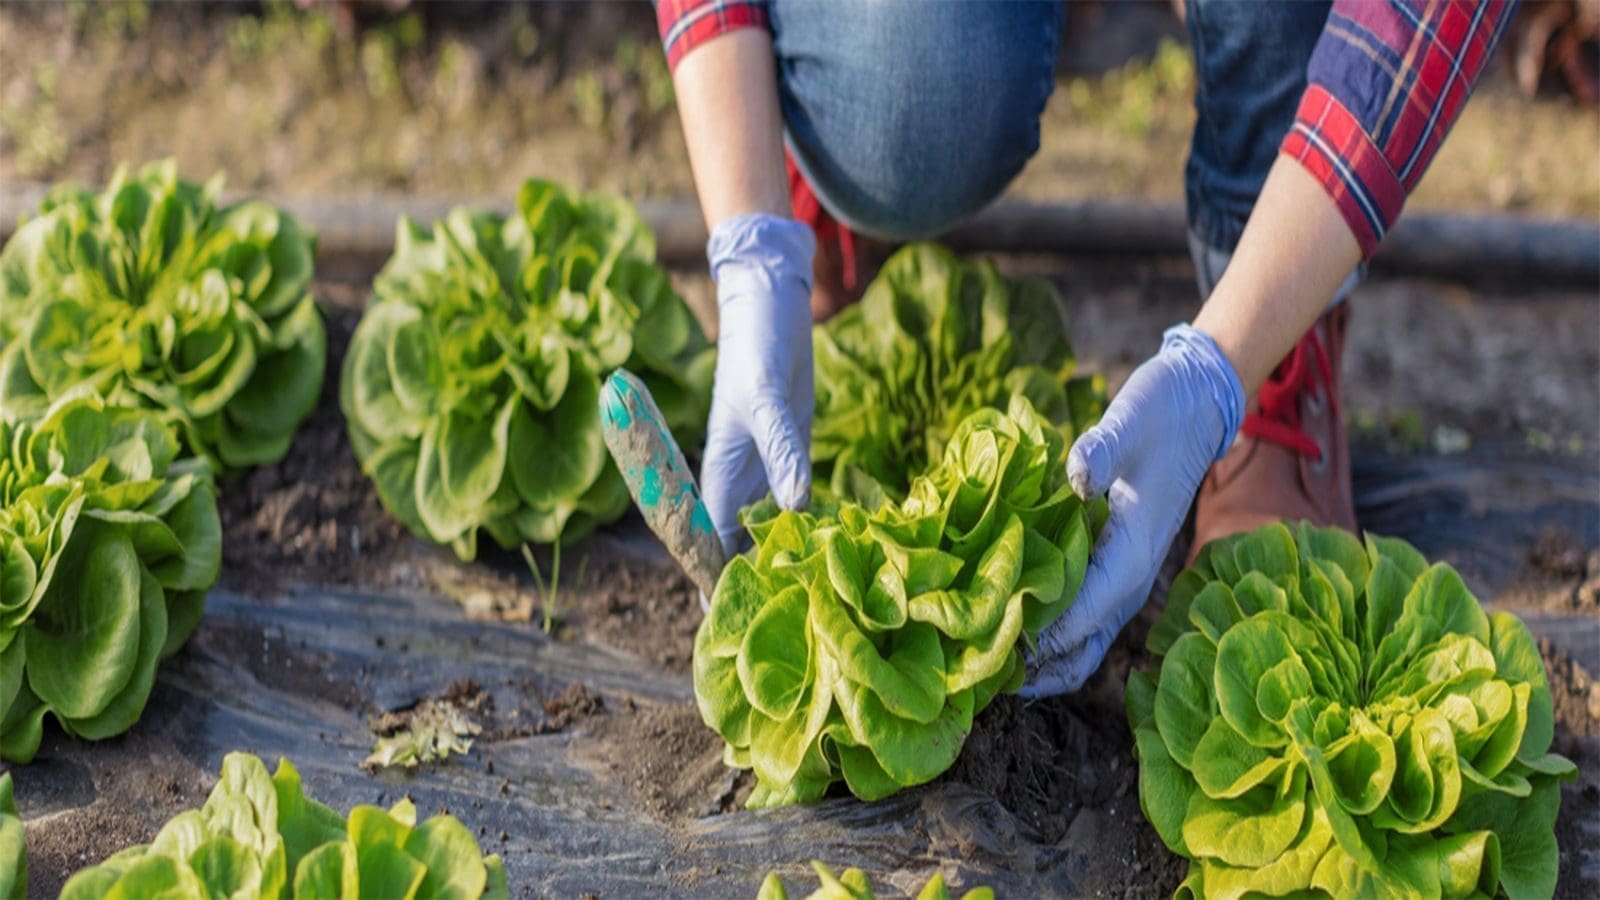 New York’s Agriculture Department releases new produce traceability guidance